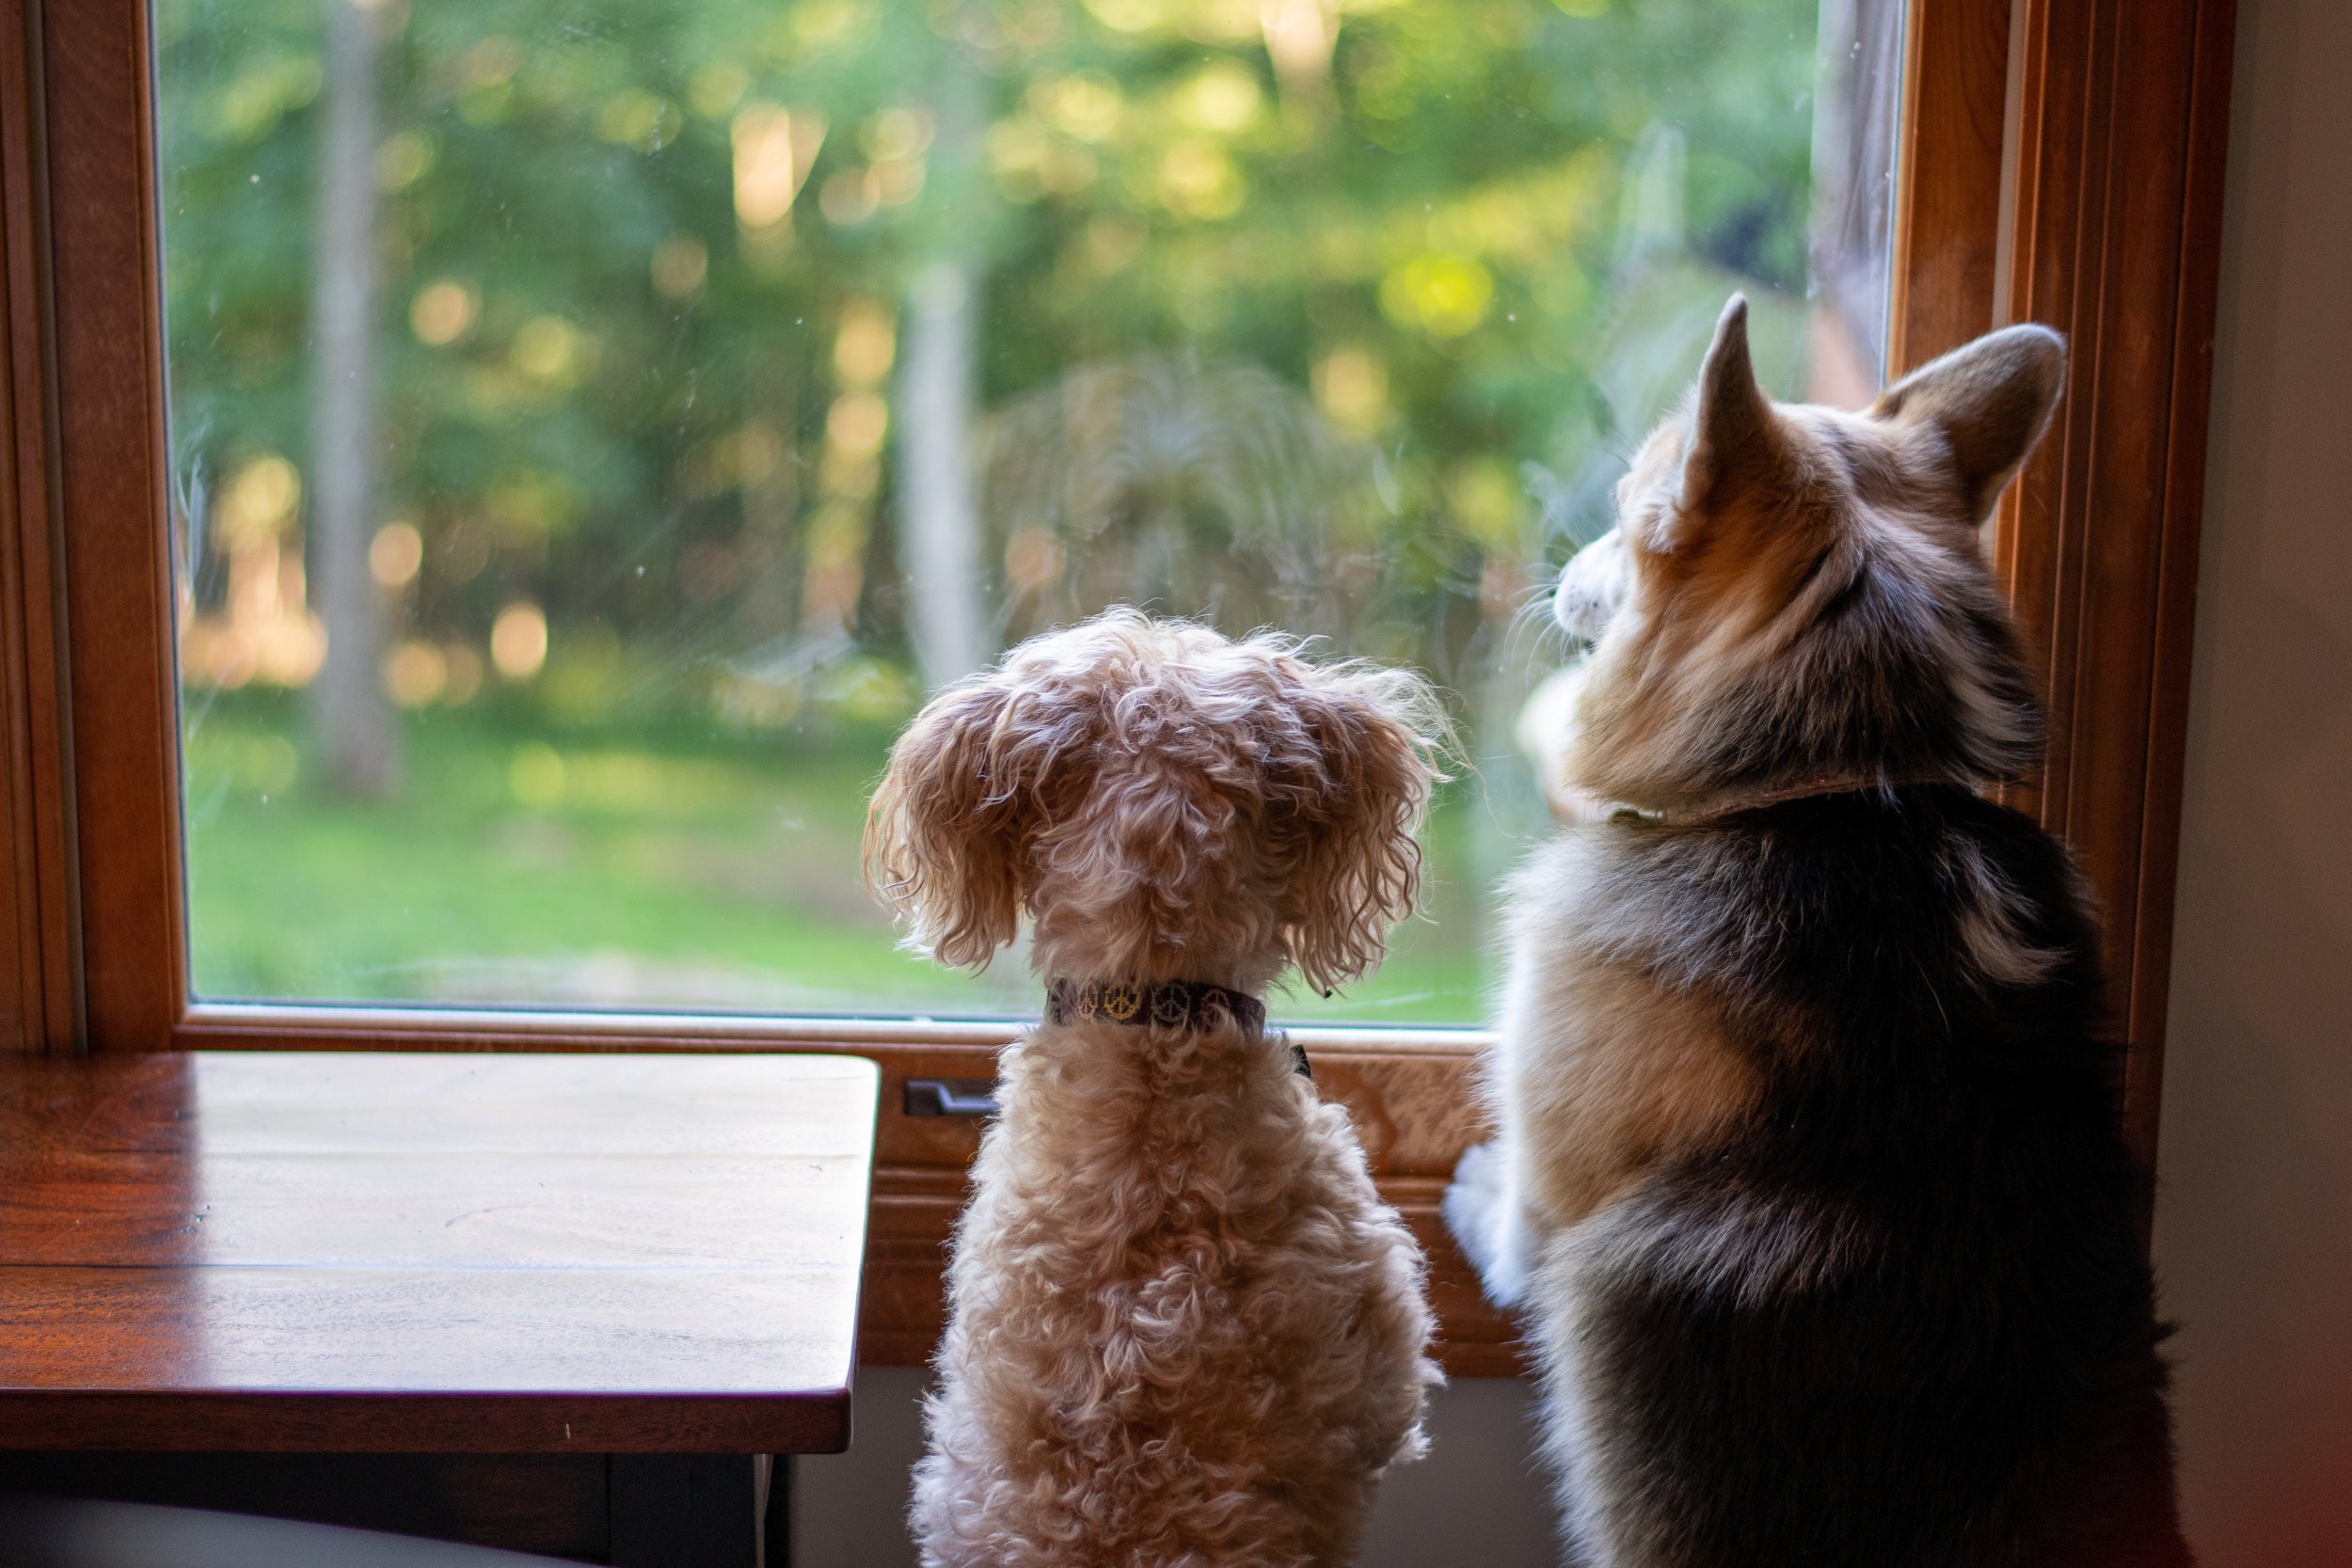 Two dogs looking out window_iStock-1176111300.jpeg